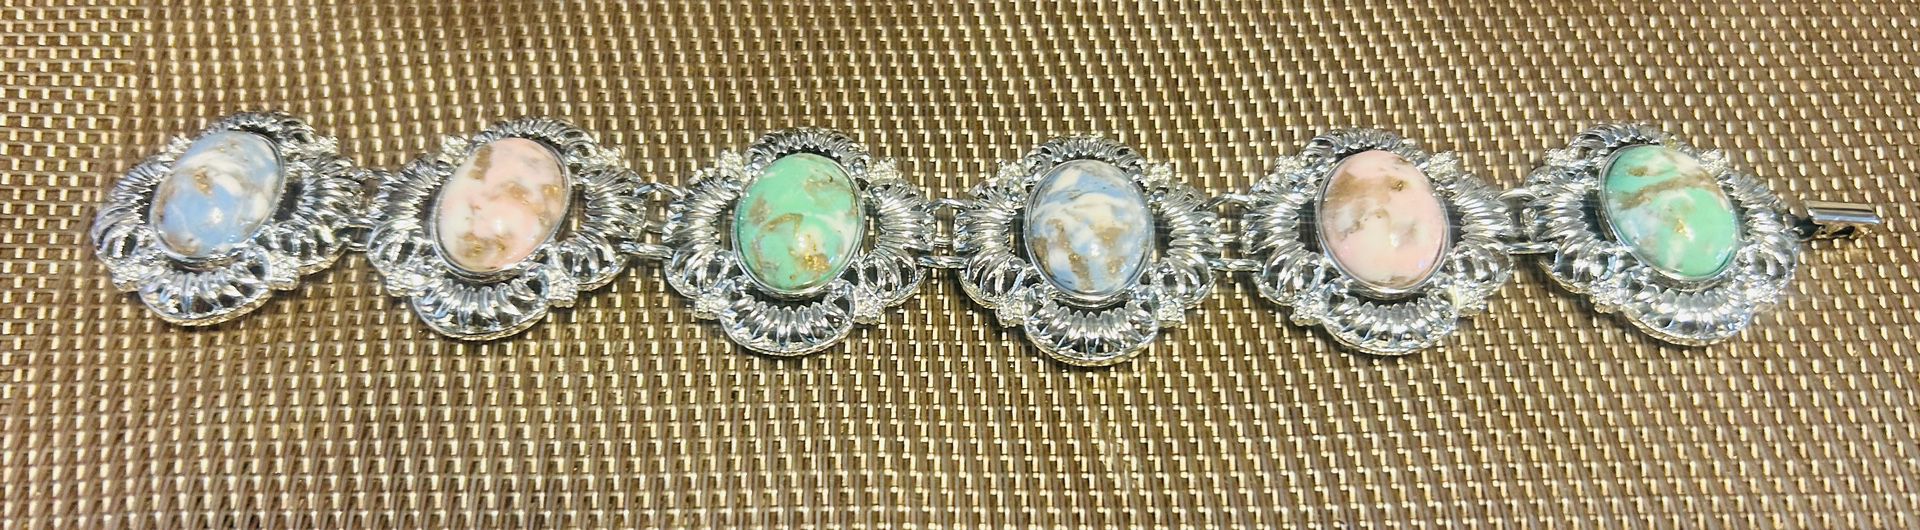 Vintage Sarah Coventry 7 Inch Bracelet With Beautiful Stones  